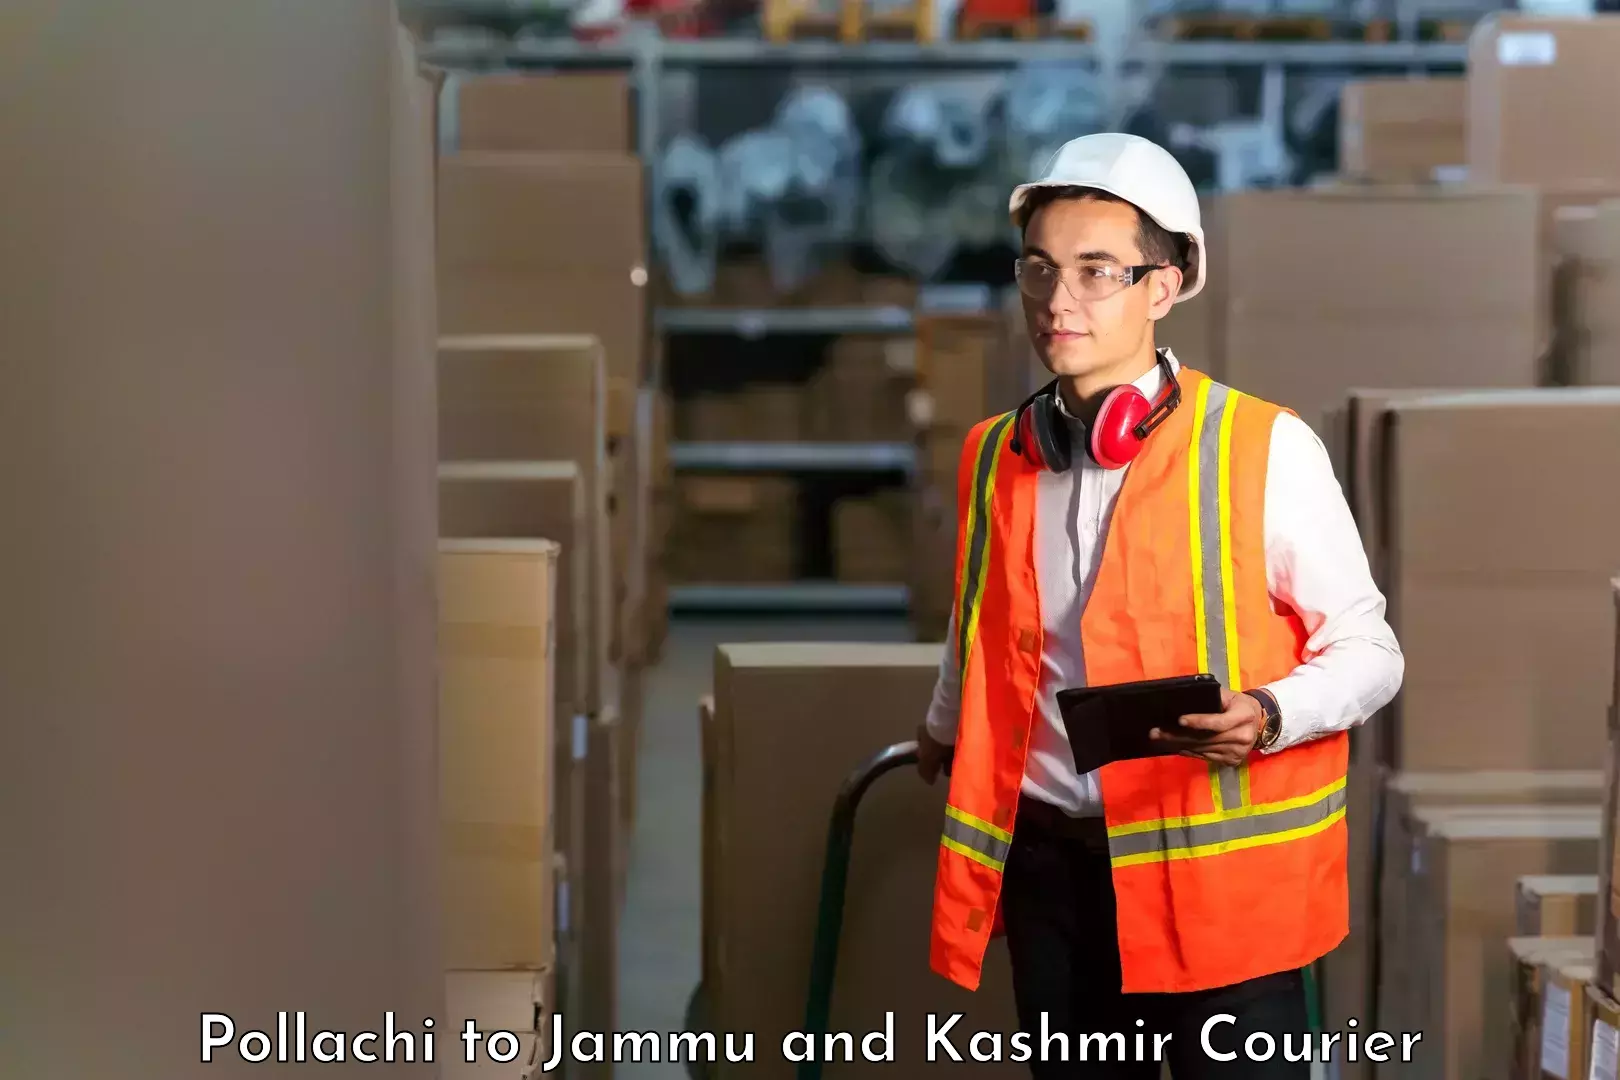 Courier service comparison in Pollachi to Jakh